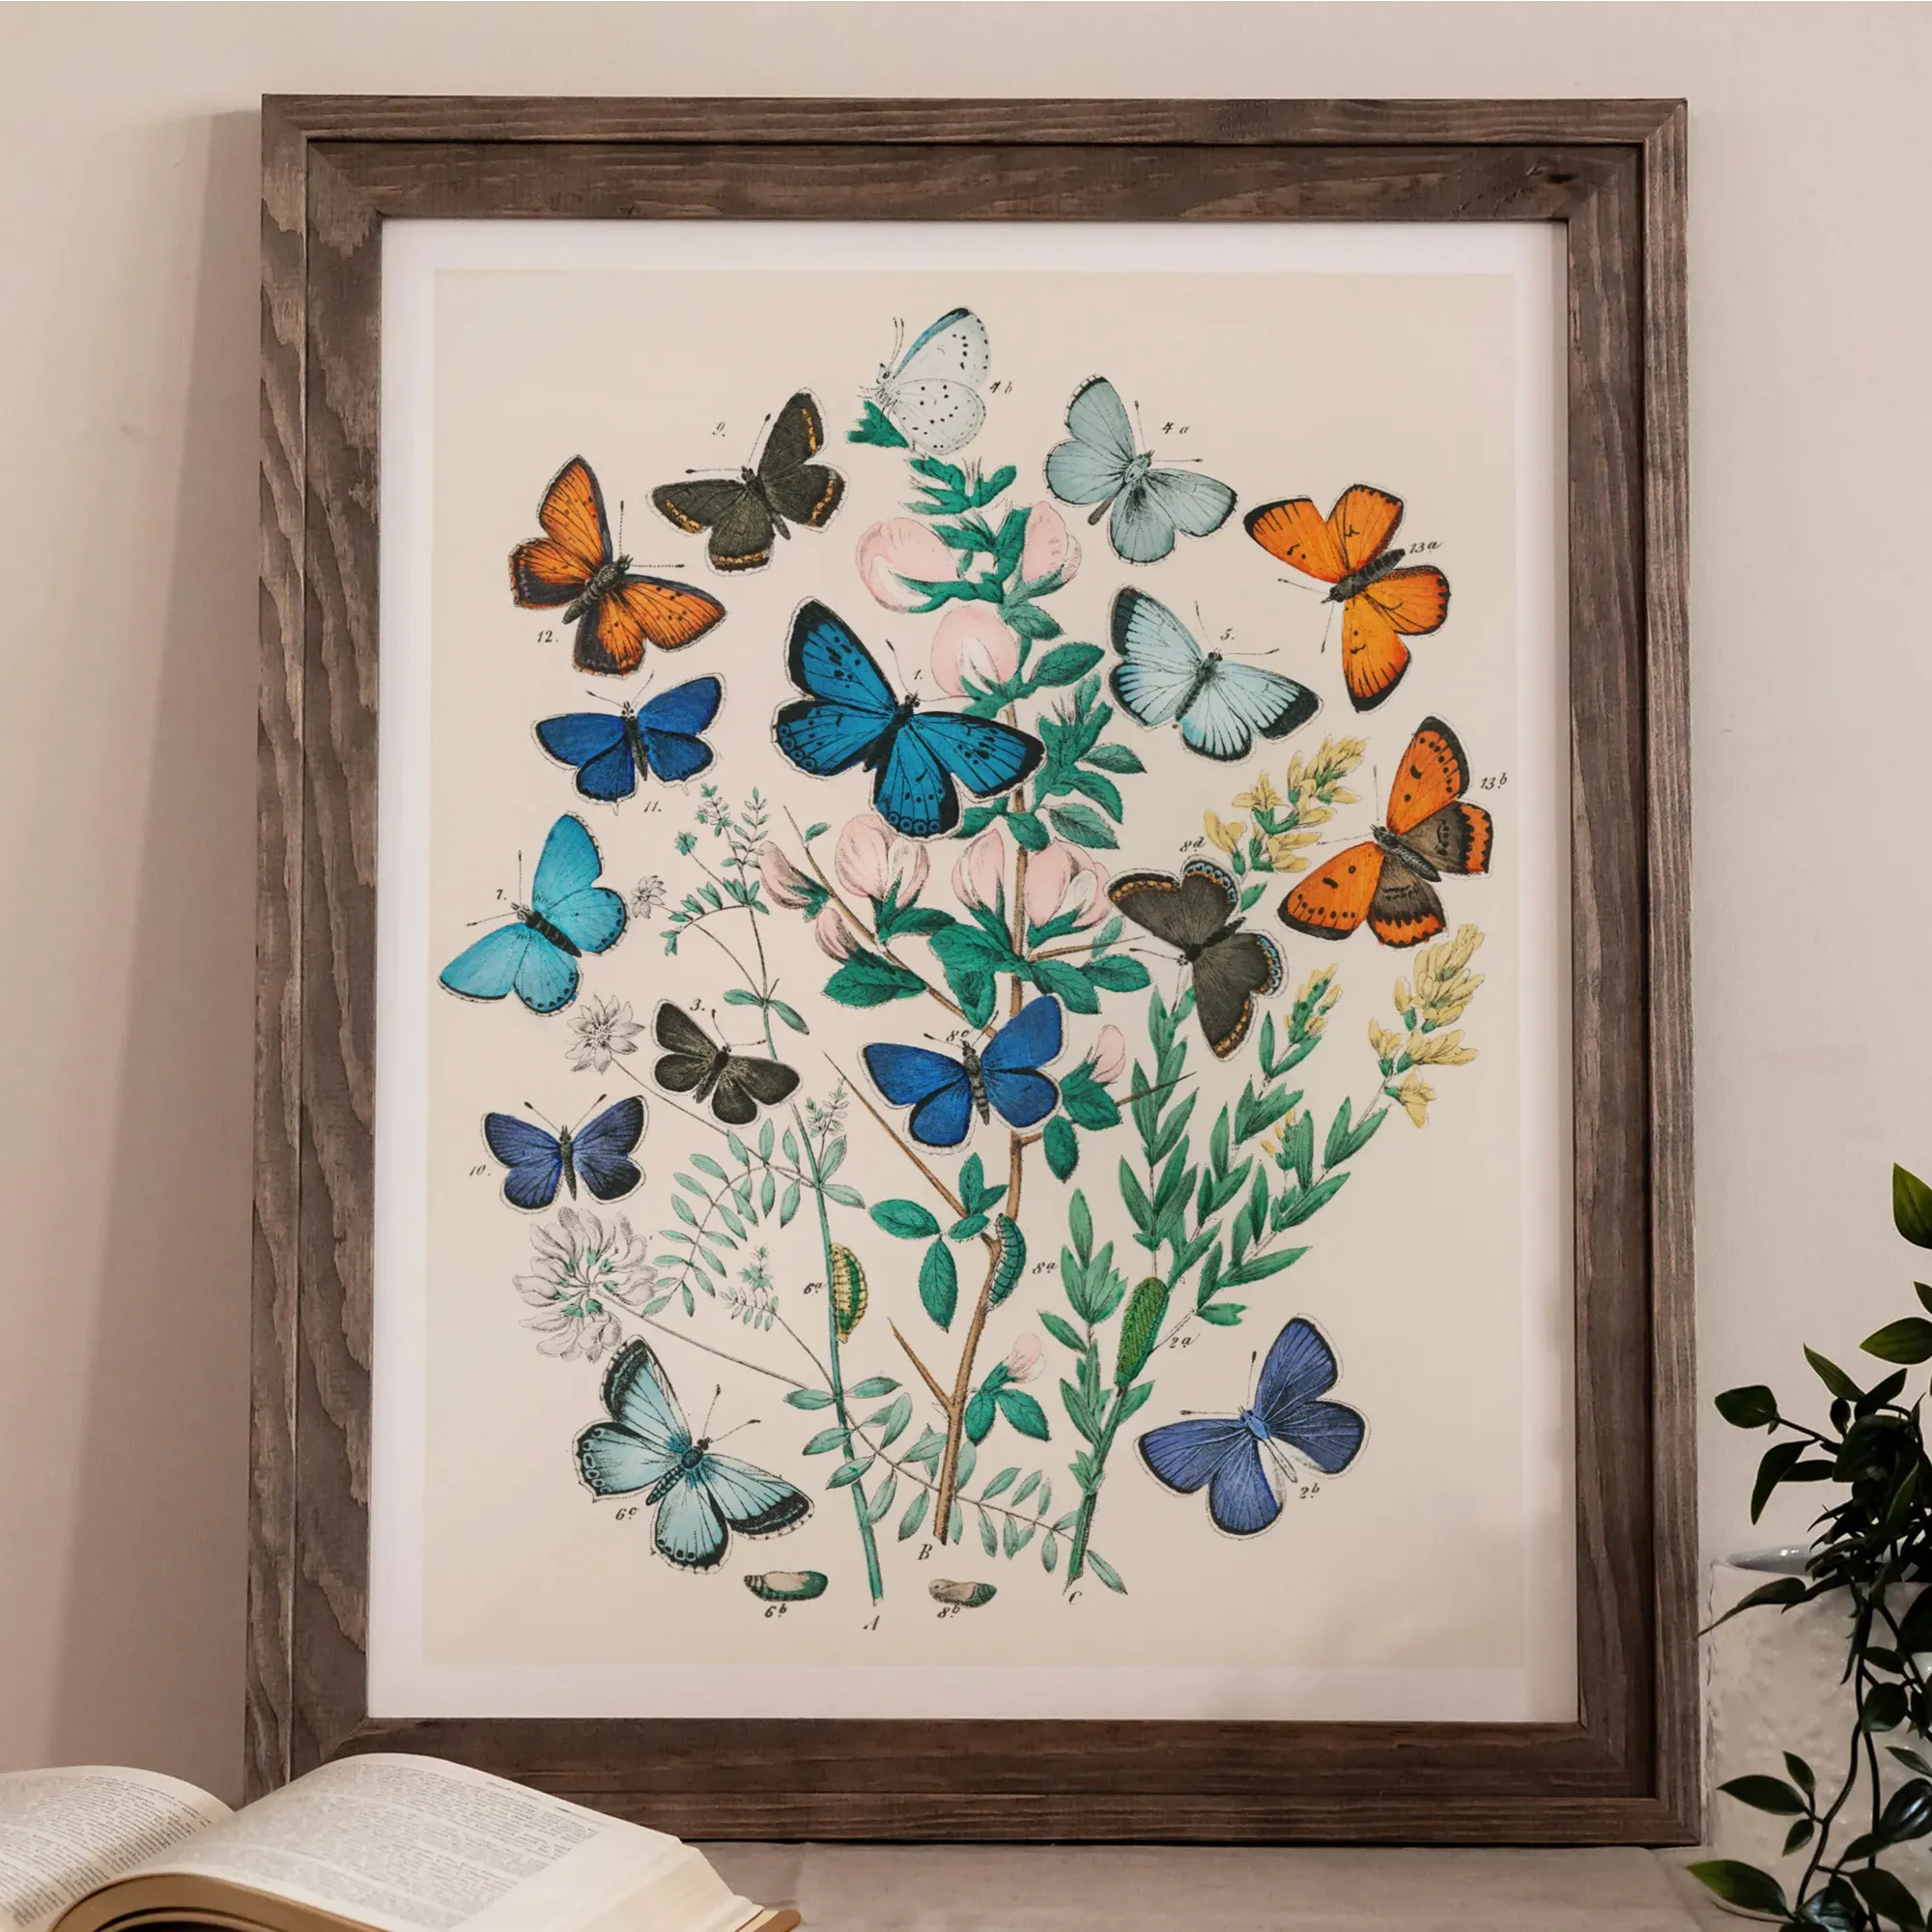 European Butterflies And Moths - William Forsell Kirby Fine Art Print - 16’x20’ - Posters Prints & Visual Artwork